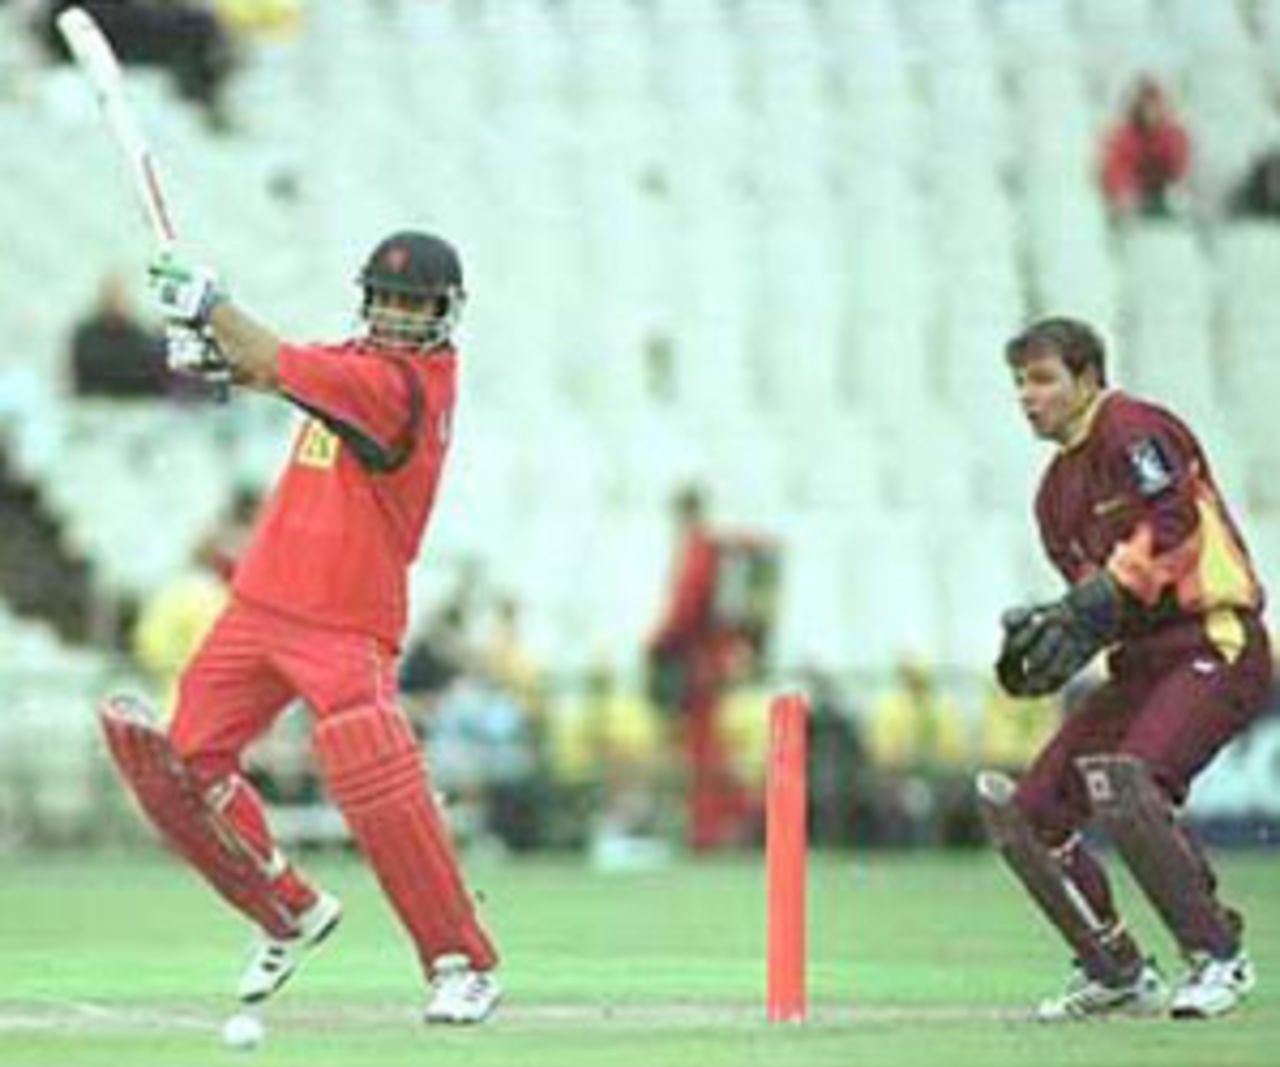 Ganguly cuts the ball ferociously, National League Division One, 2000, Lancashire v Northamptonshire, Old Trafford, Manchester, 23 June 2000.